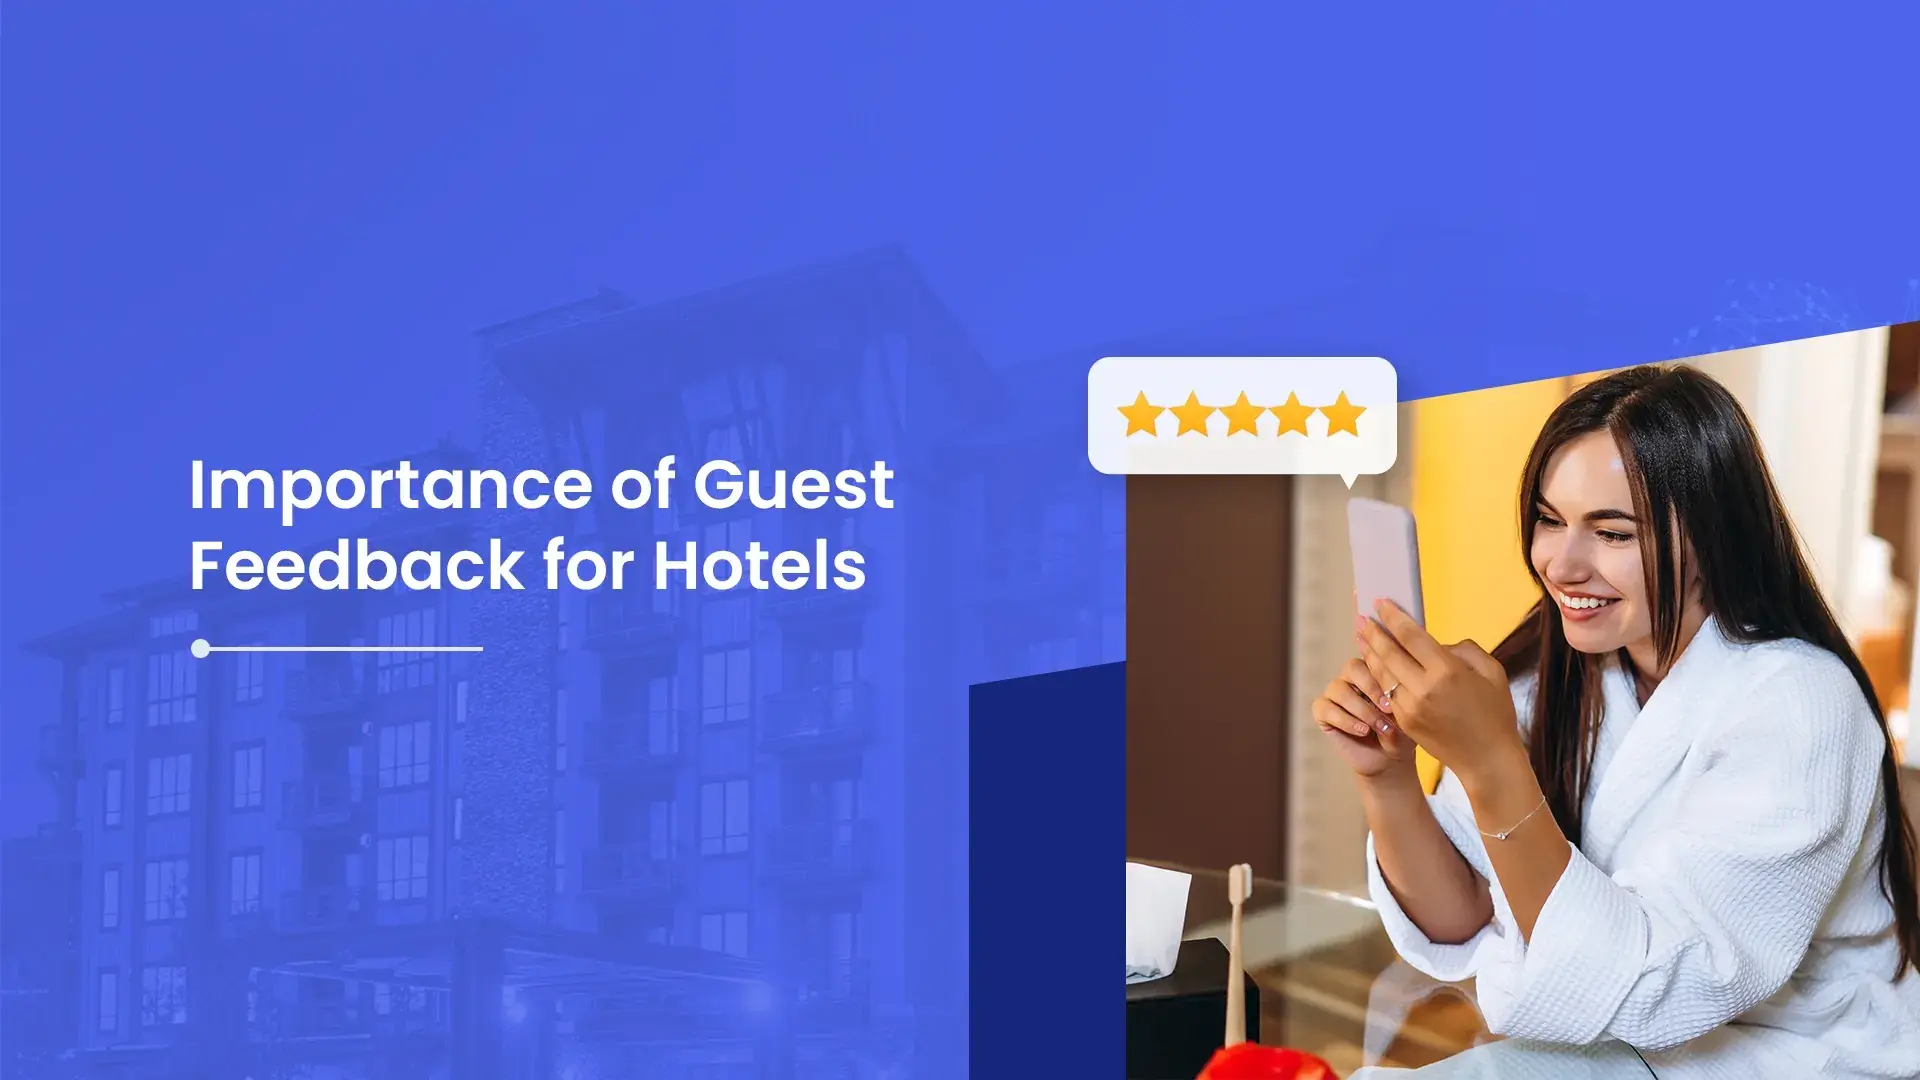 Importance of Guest Feedback for Hotels